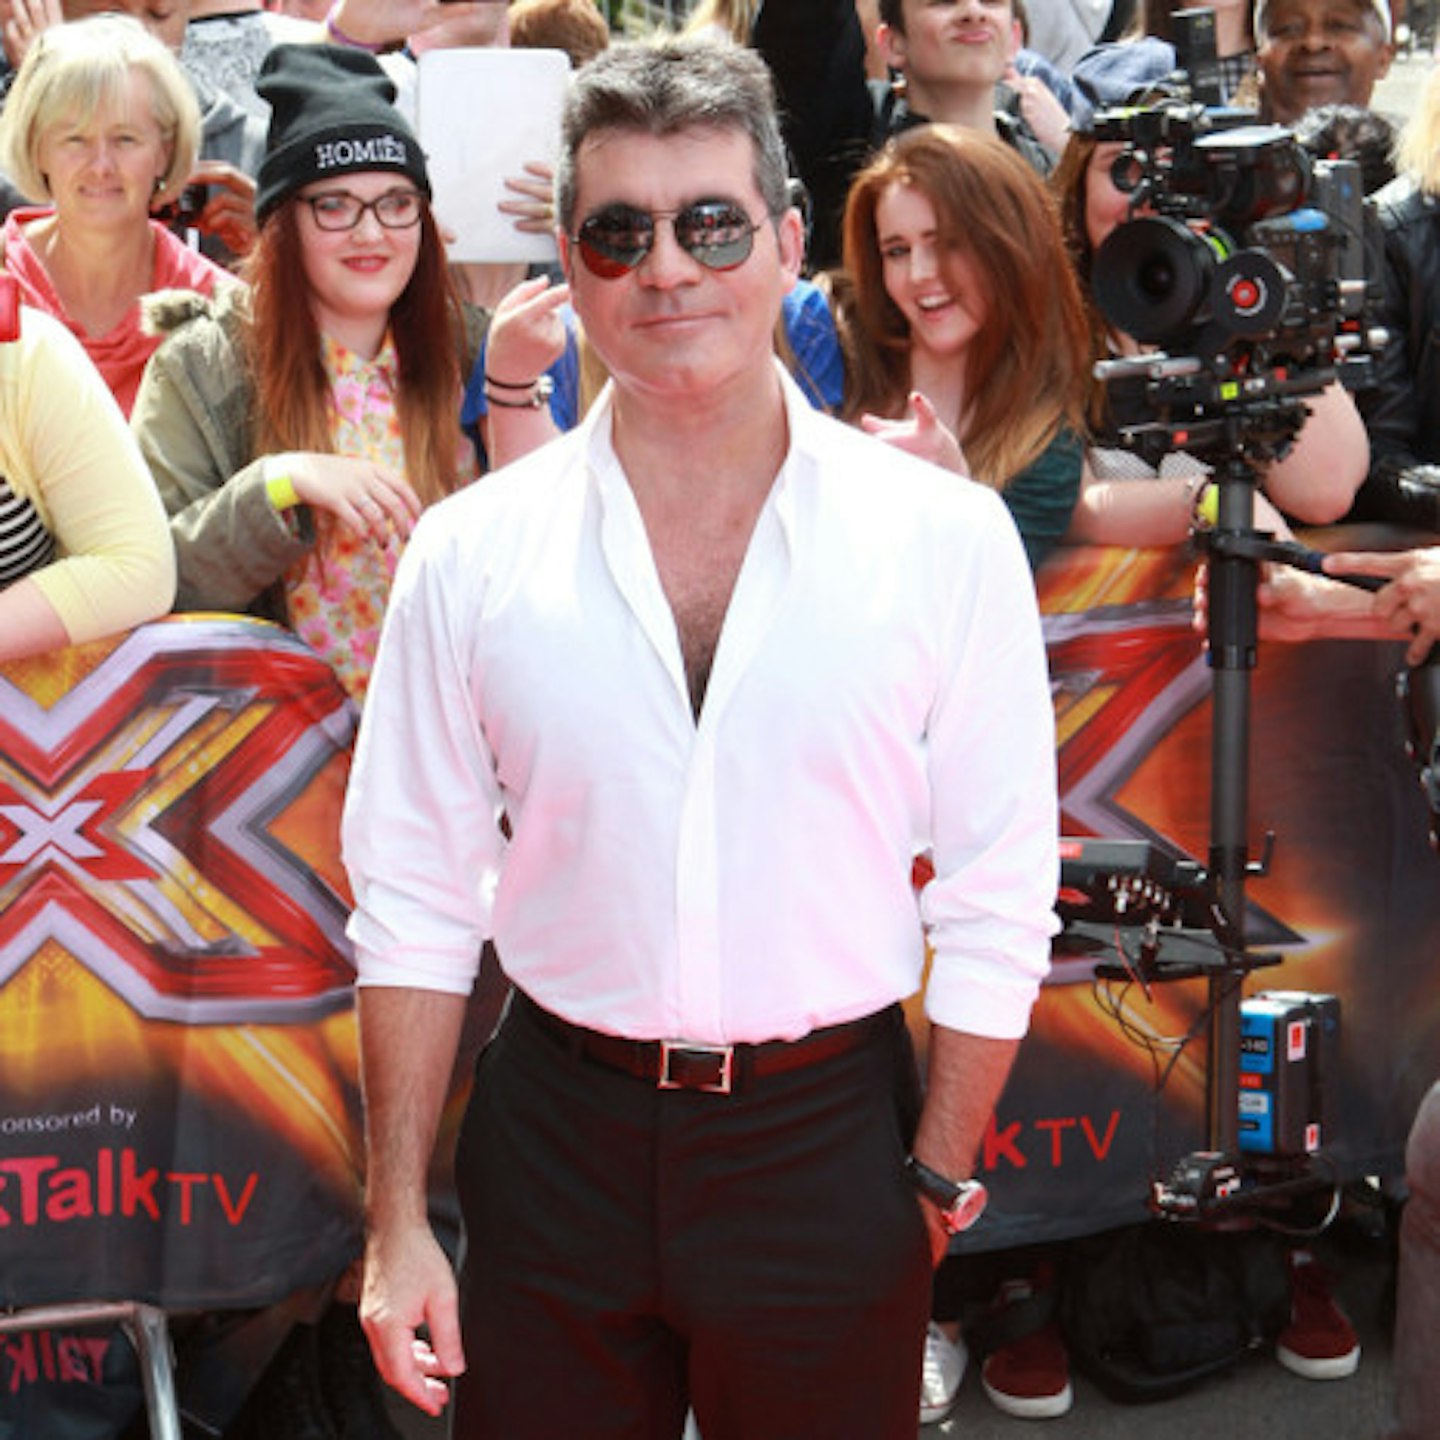 Simon insisted that Cheryl and Mel are 'really, really good'